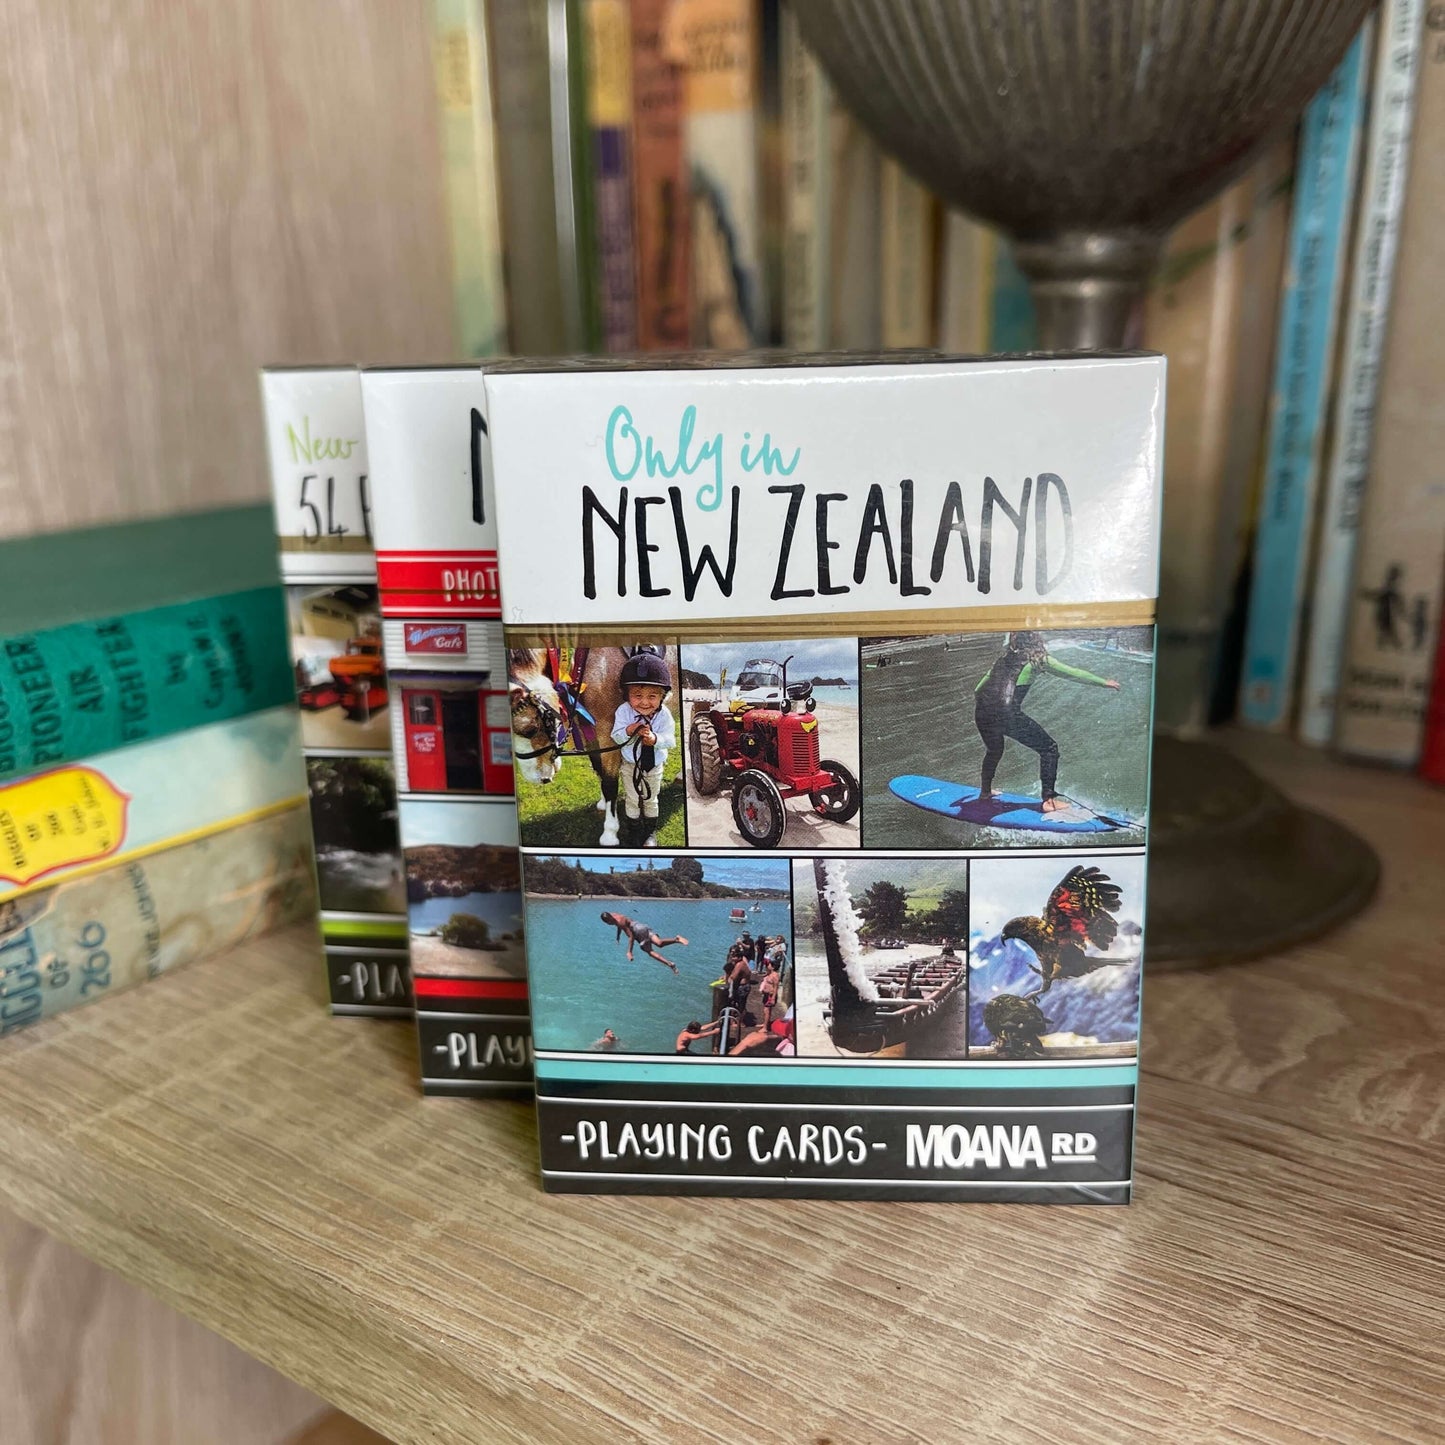 Pack of playing cards featuring scenes only found in New Zealand sitting on a book shelf with other card packs behind it.